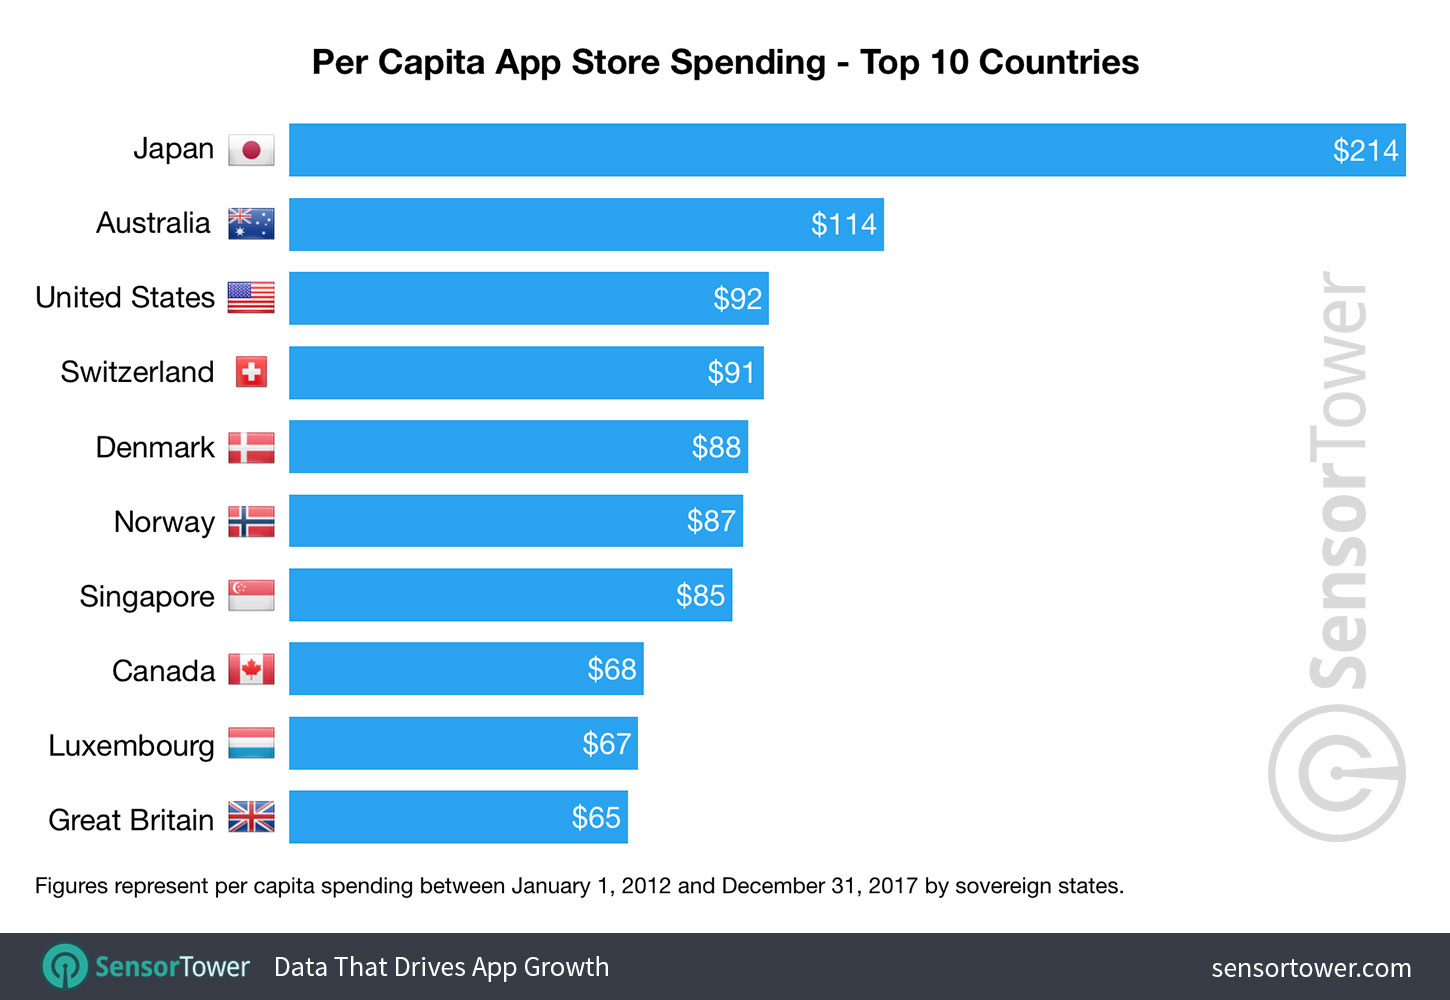 Chart showing a ranking of countries by per capita spending on Apple's App Store between 2012 and 2017